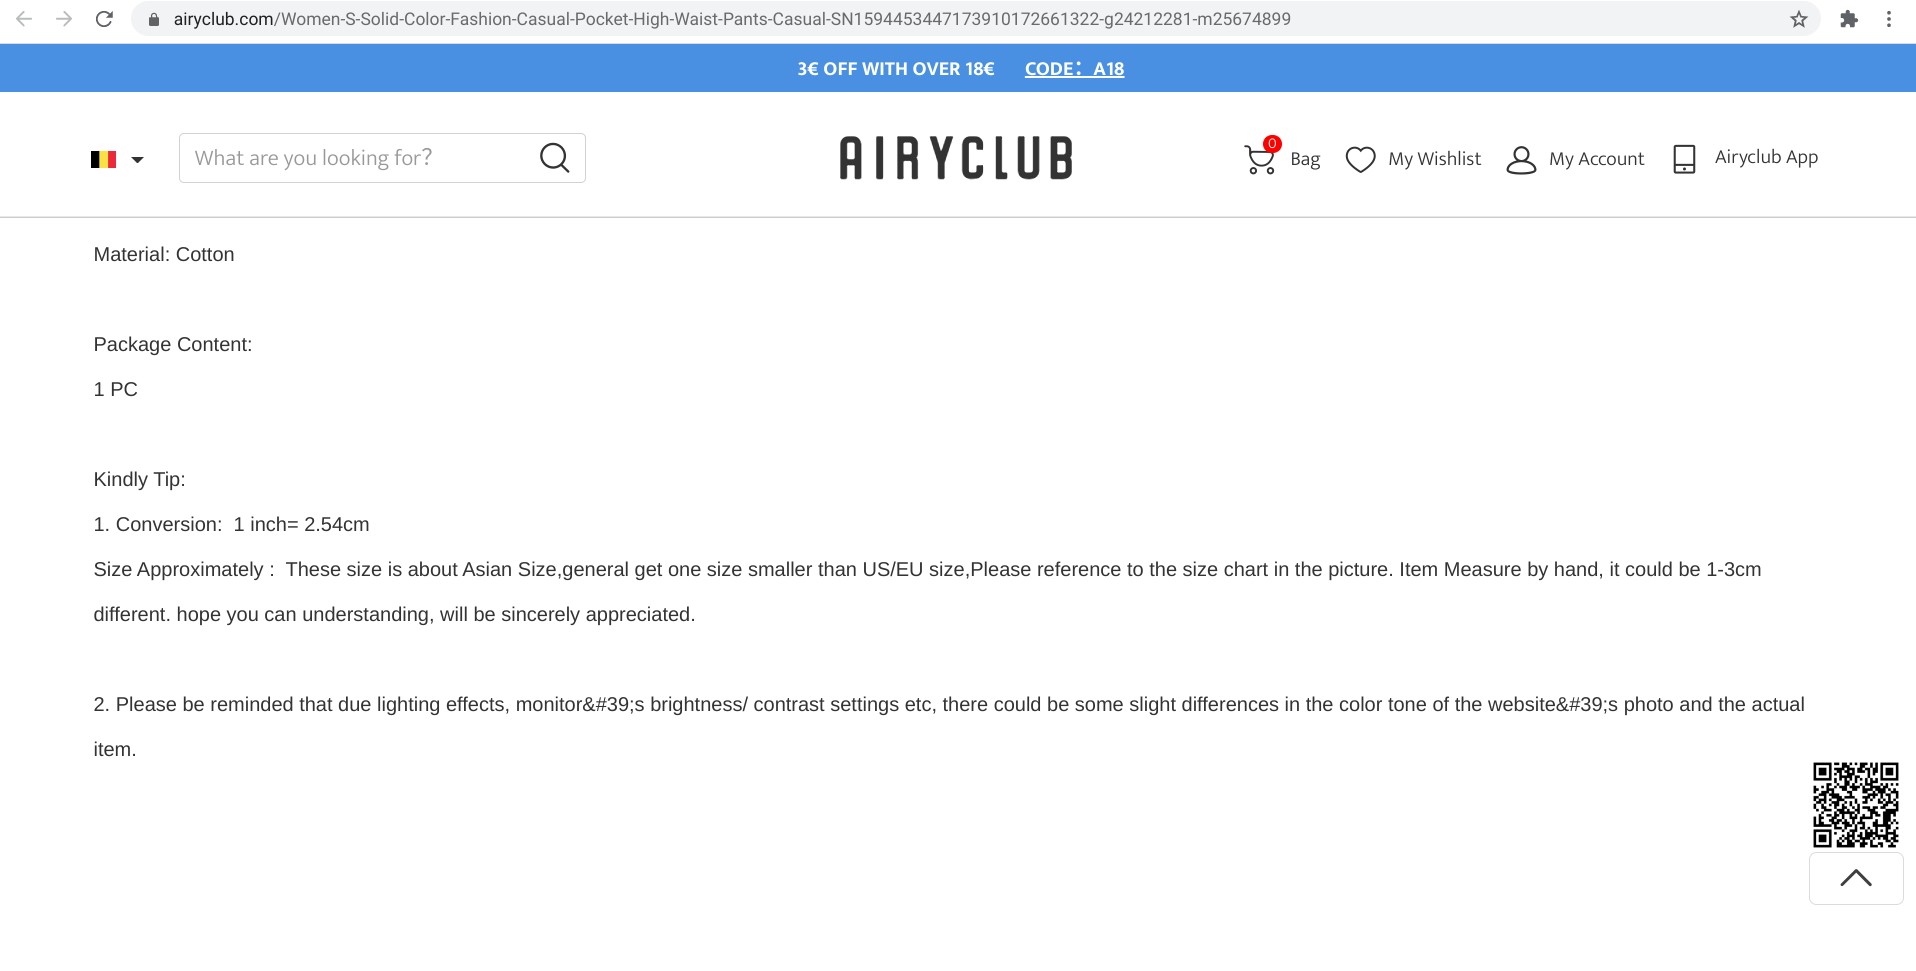 Screenshot of airyclub product description for language analysis